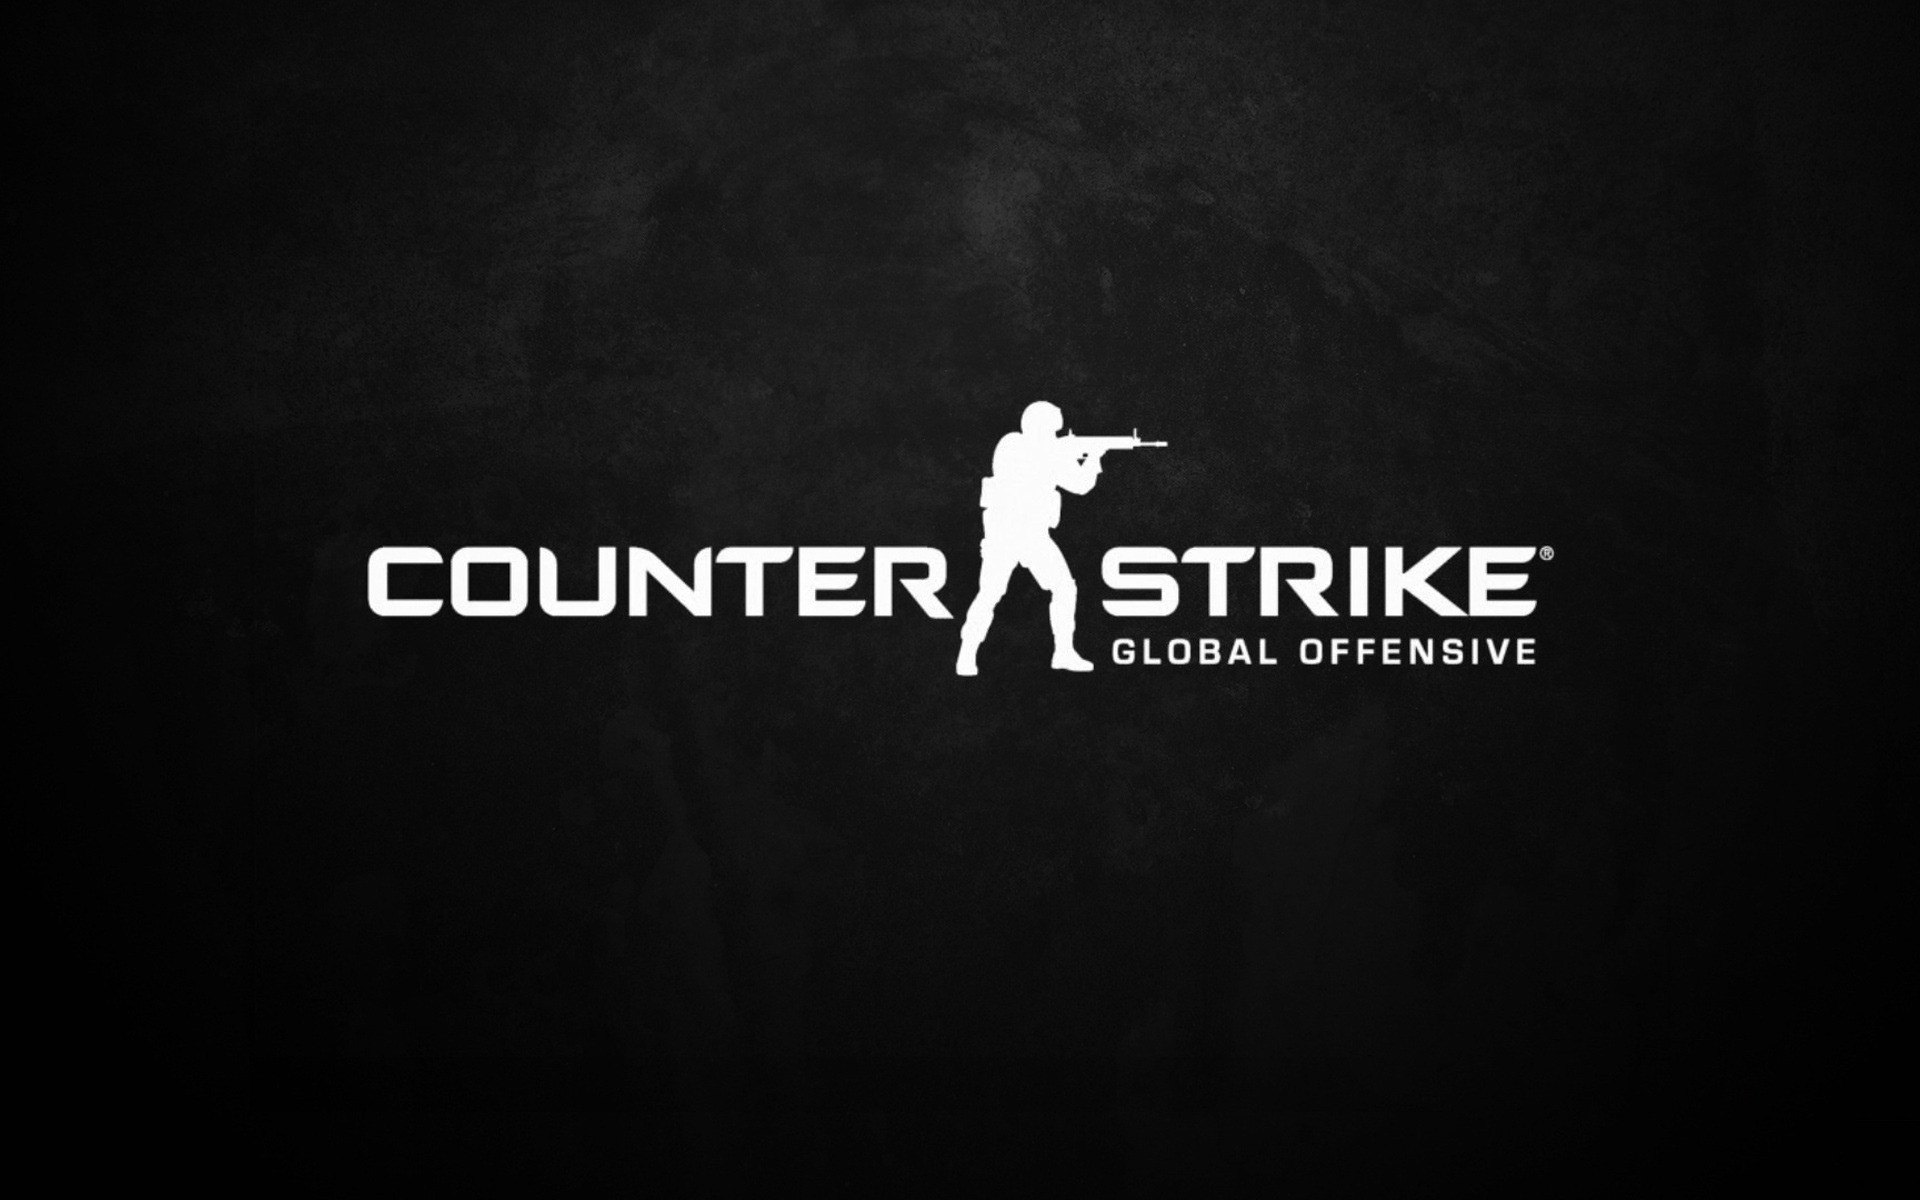 General 1920x1200 Counter-Strike: Global Offensive Counter-Strike simple background PC gaming black background logo